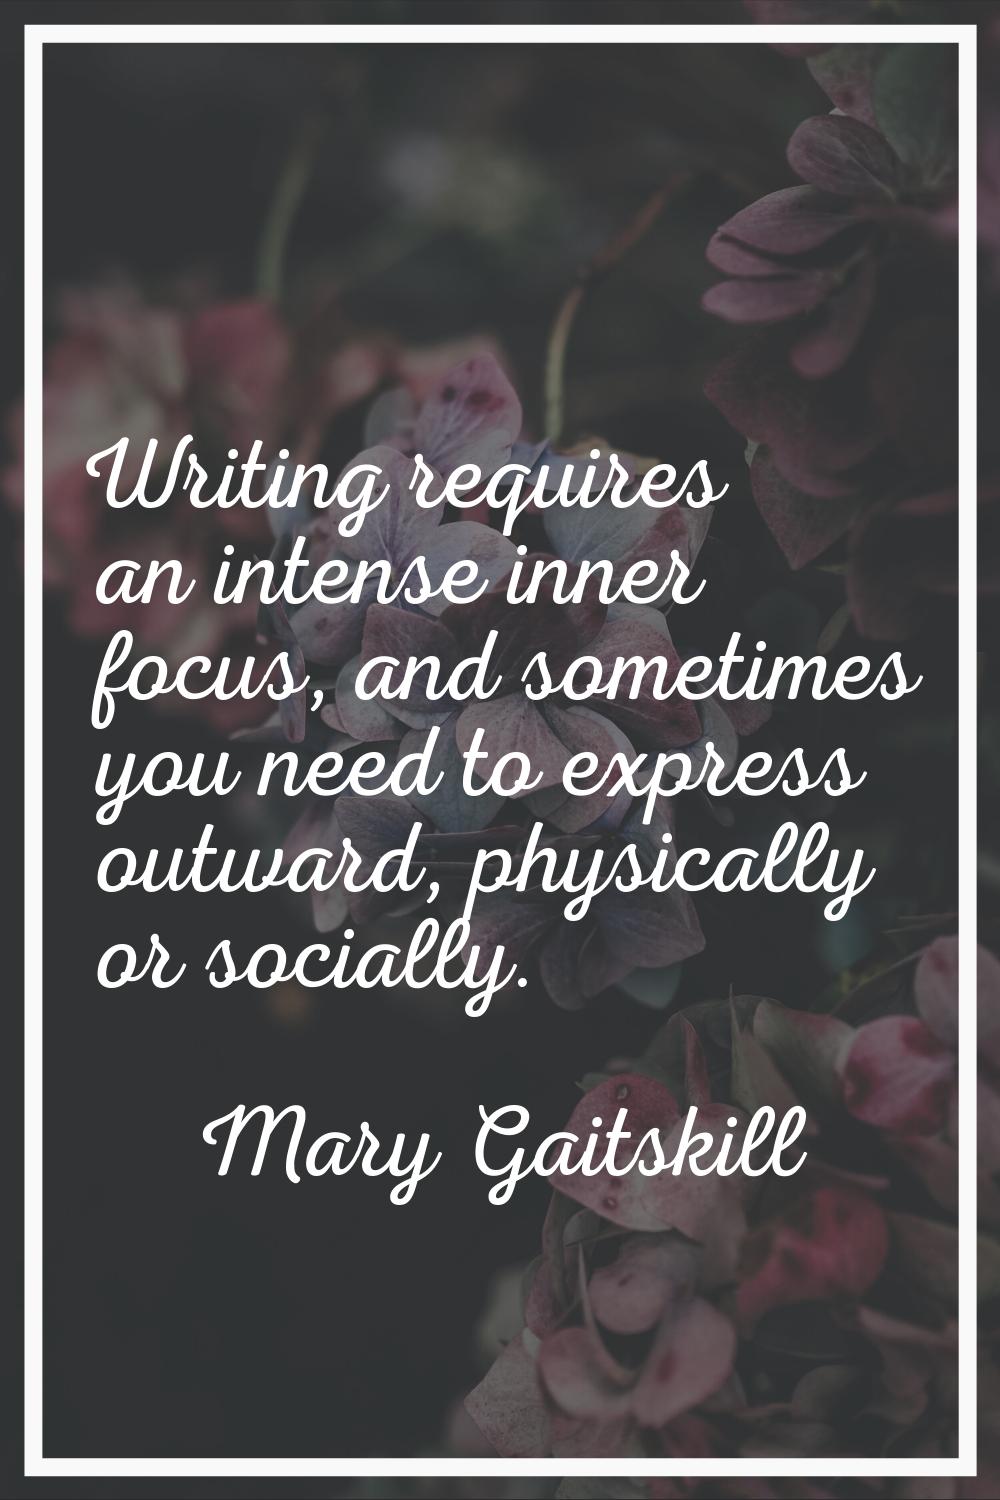 Writing requires an intense inner focus, and sometimes you need to express outward, physically or s